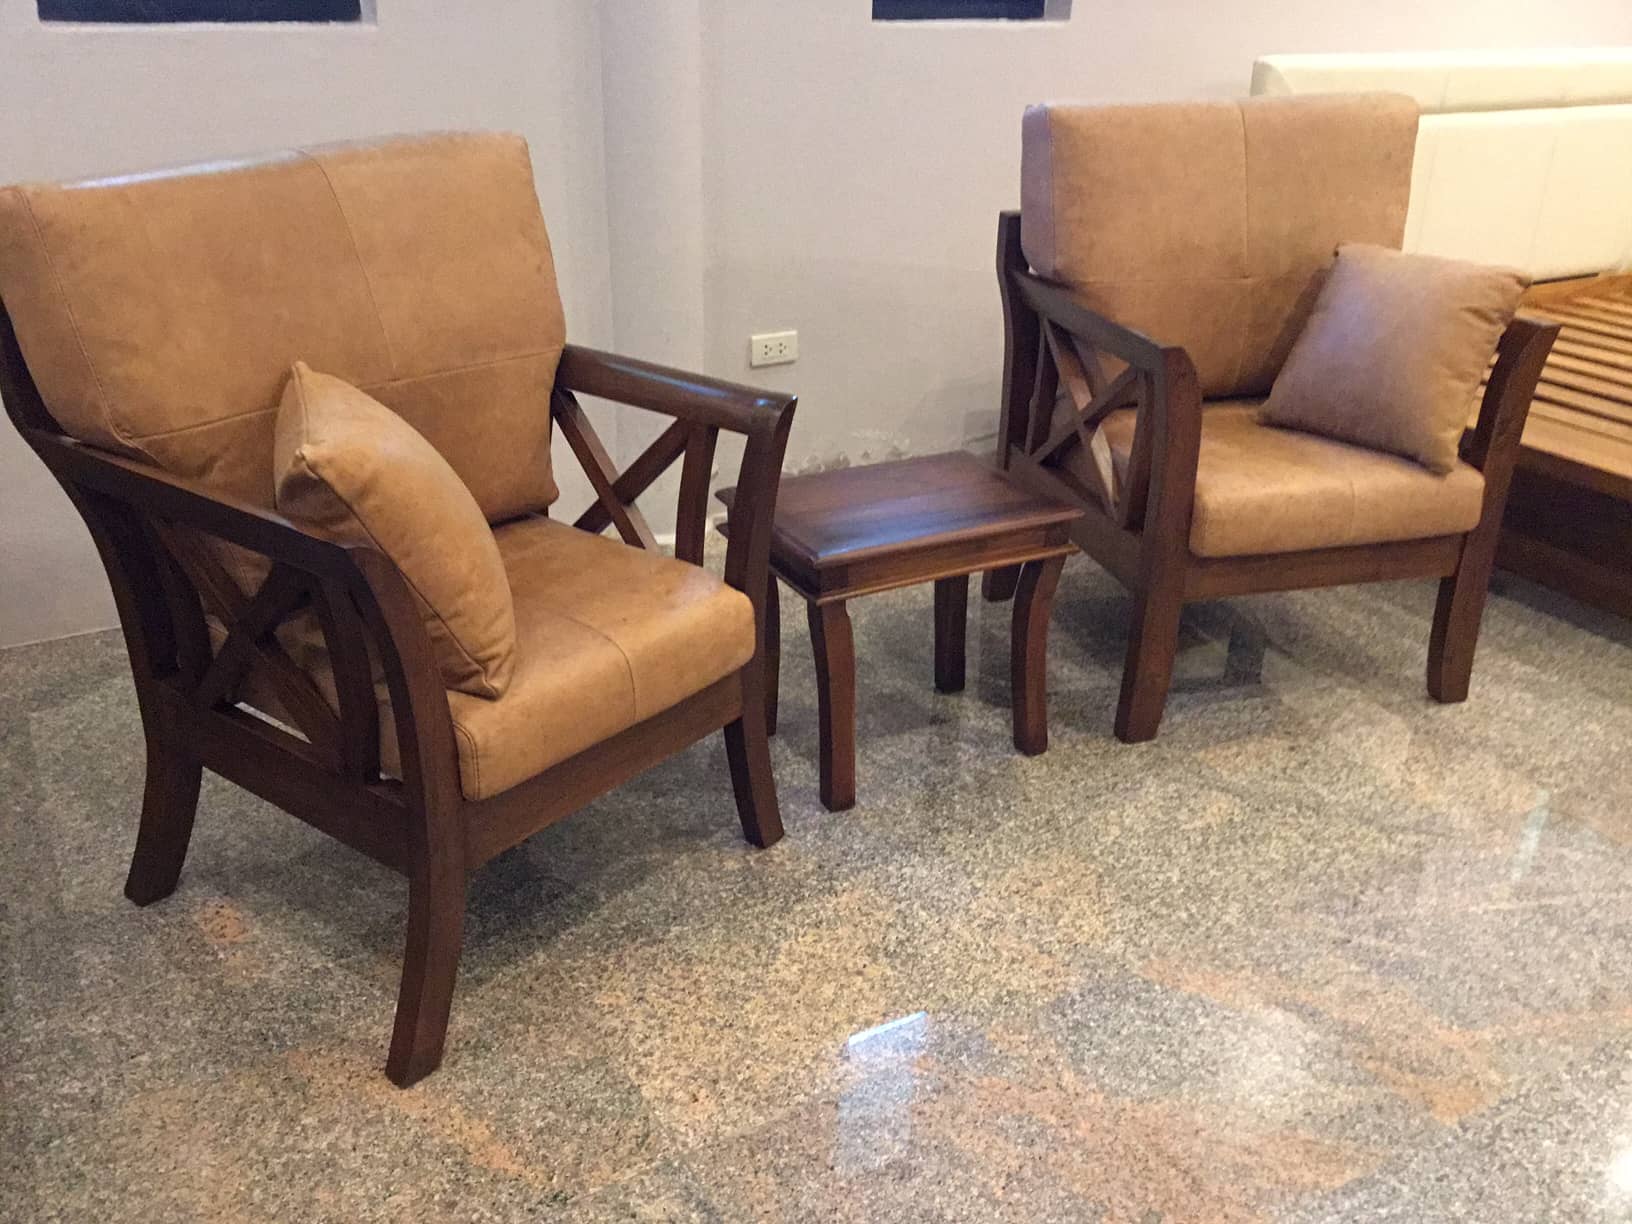 Made to Order Accent and Club Chairs. - ACC 044-01